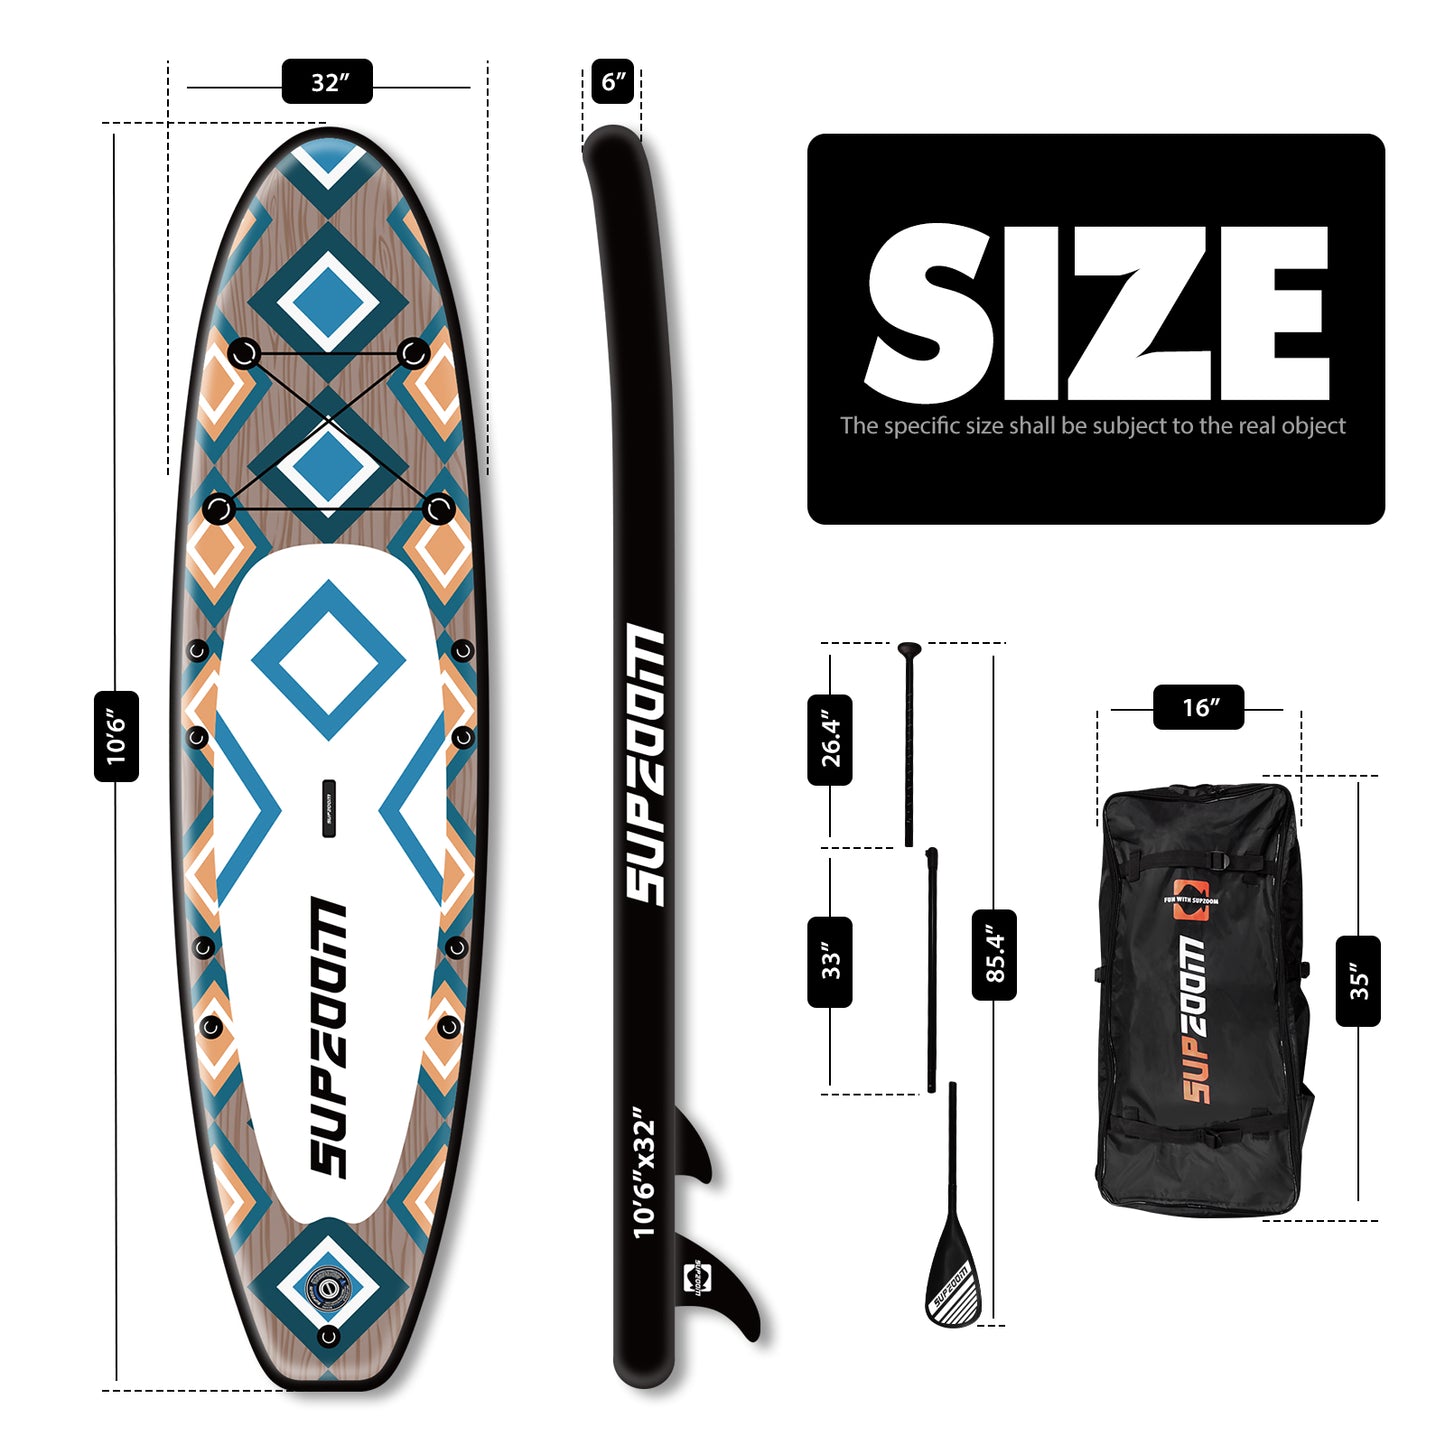 The size of all round 10'6" paddle board | Supzoom alien style